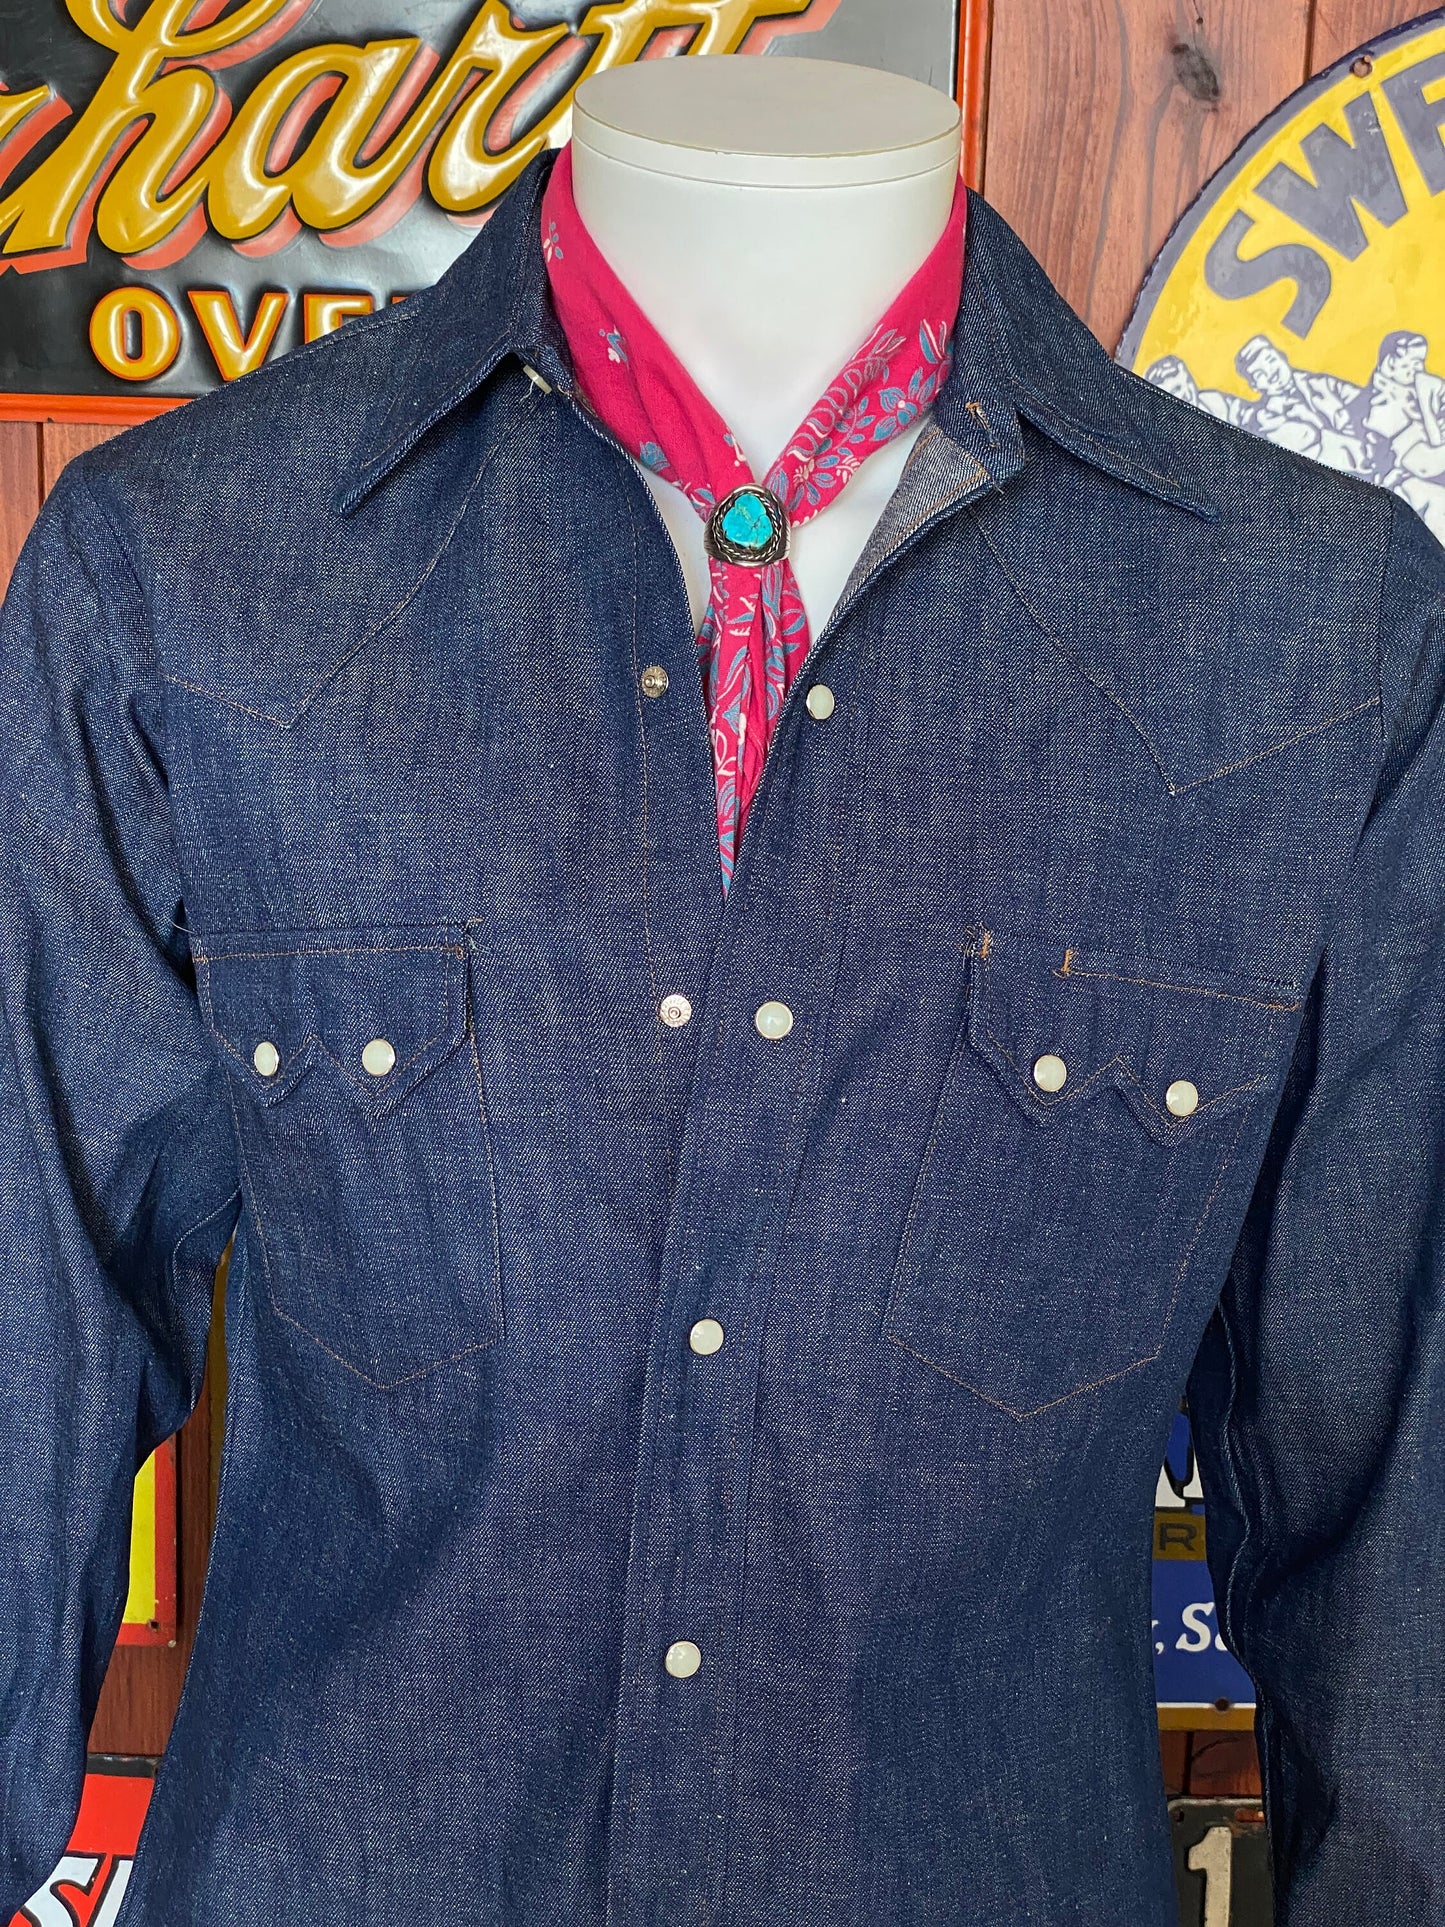 Size Small. Dee Dee 70s denim shirt New Old stock made in USA